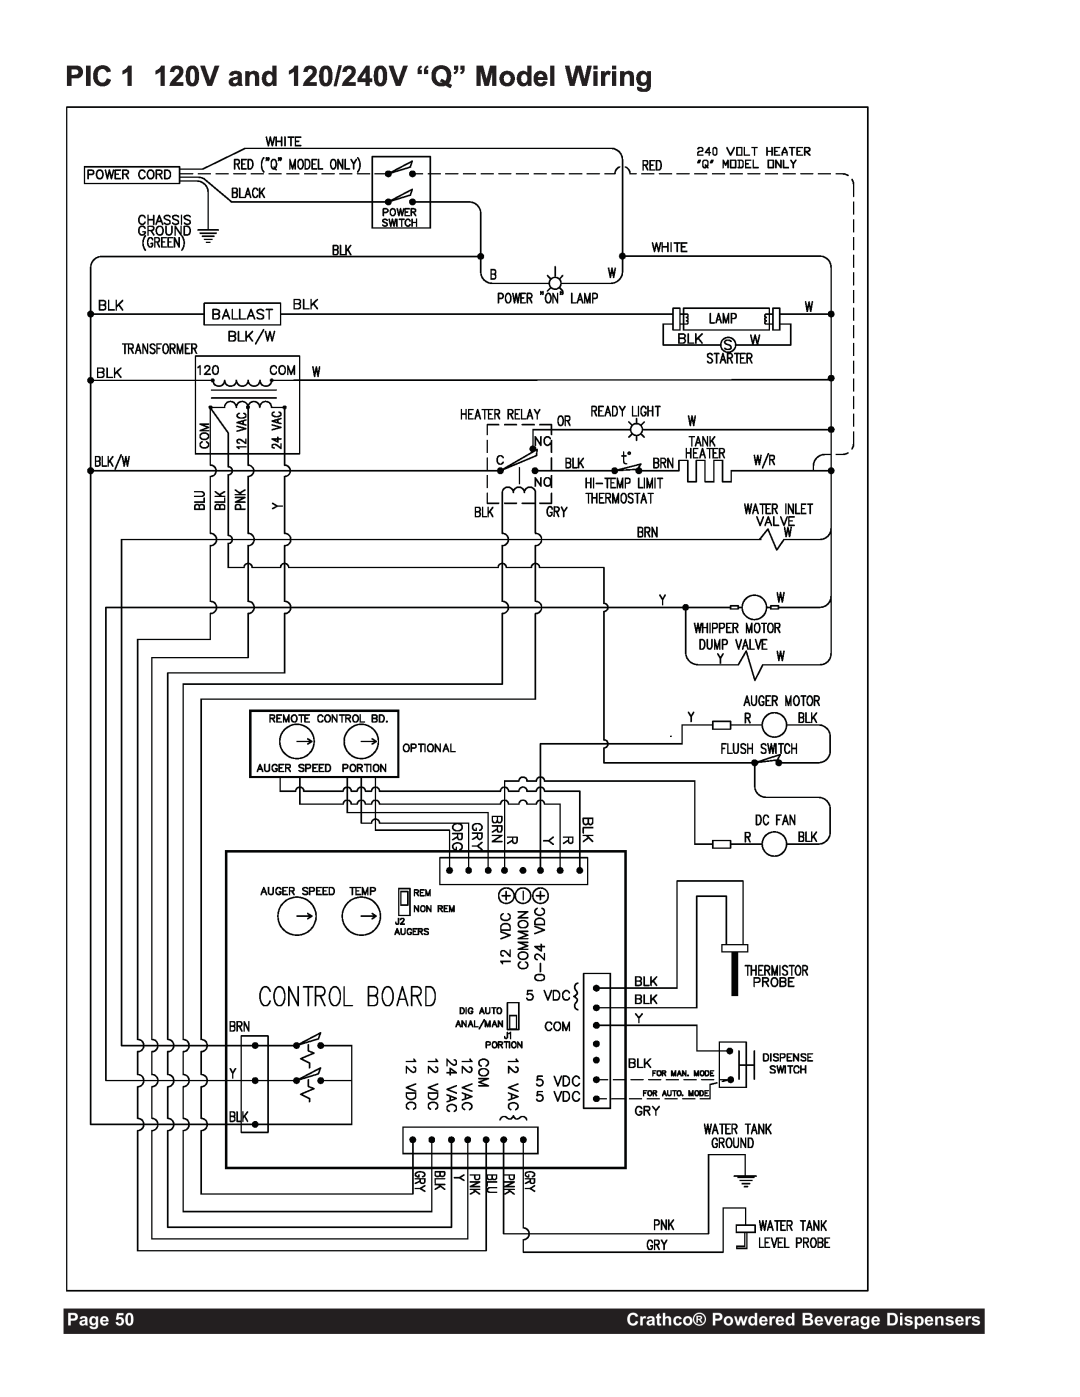 Grindmaster CC-302-20 service manual PIC 1 120V and 120/240V “Q” Model Wiring, Page, Crathco Powdered Beverage Dispensers 